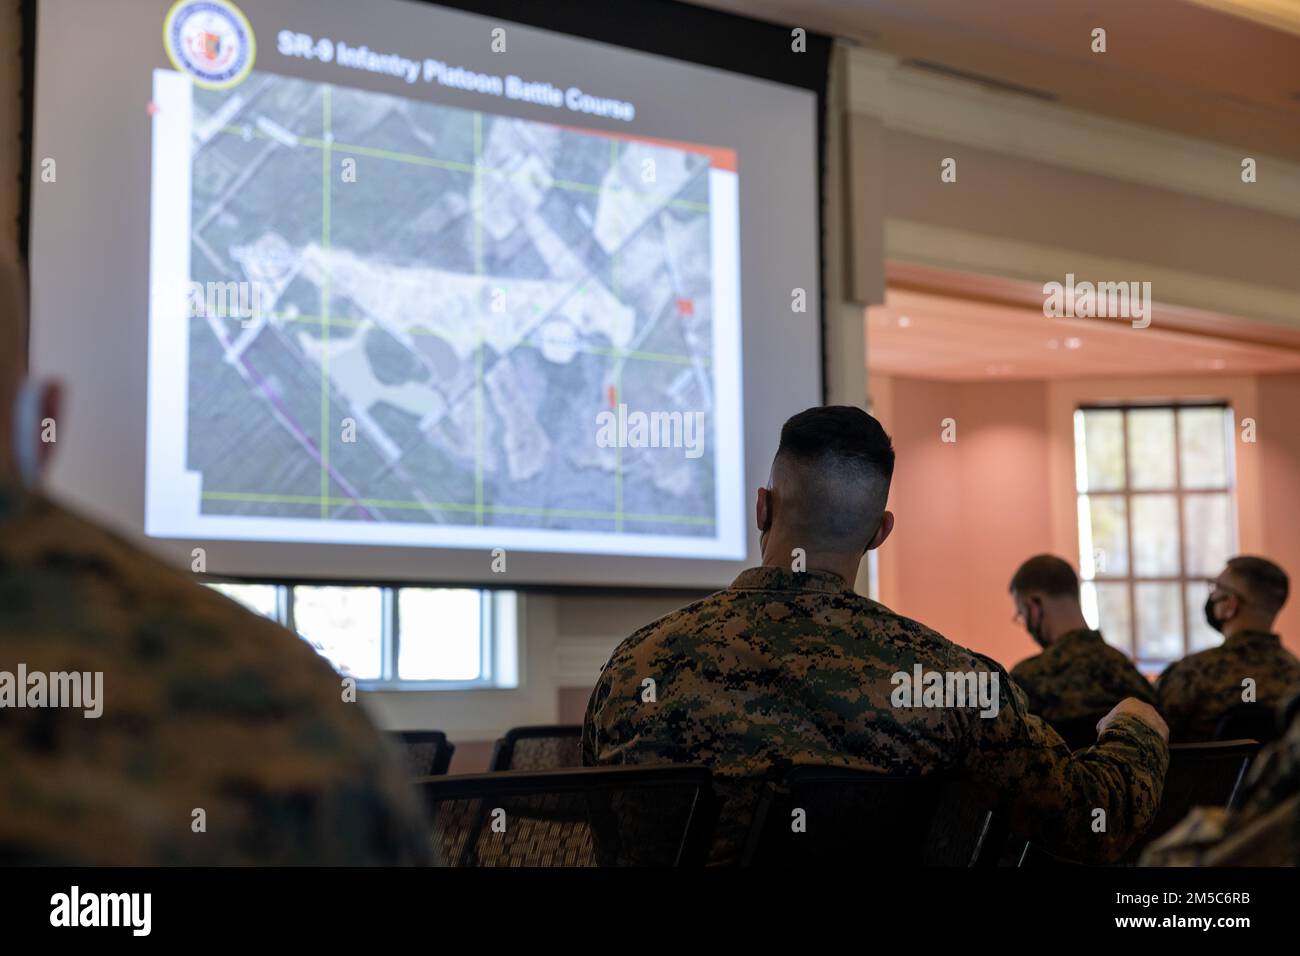 U.S Marines with II Marine Expeditionary Force attend the warfighter training symposium event at Marston Pavilion, Marine Corps Base Camp Lejeune, North Carolina, Feb. 28, 2022. The warfighter training symposium educated unit leaders across MCB Camp Lejeune on range modernization efforts, development of new ranges and highlighted other training opportunities and systems available on the installation. Stock Photo